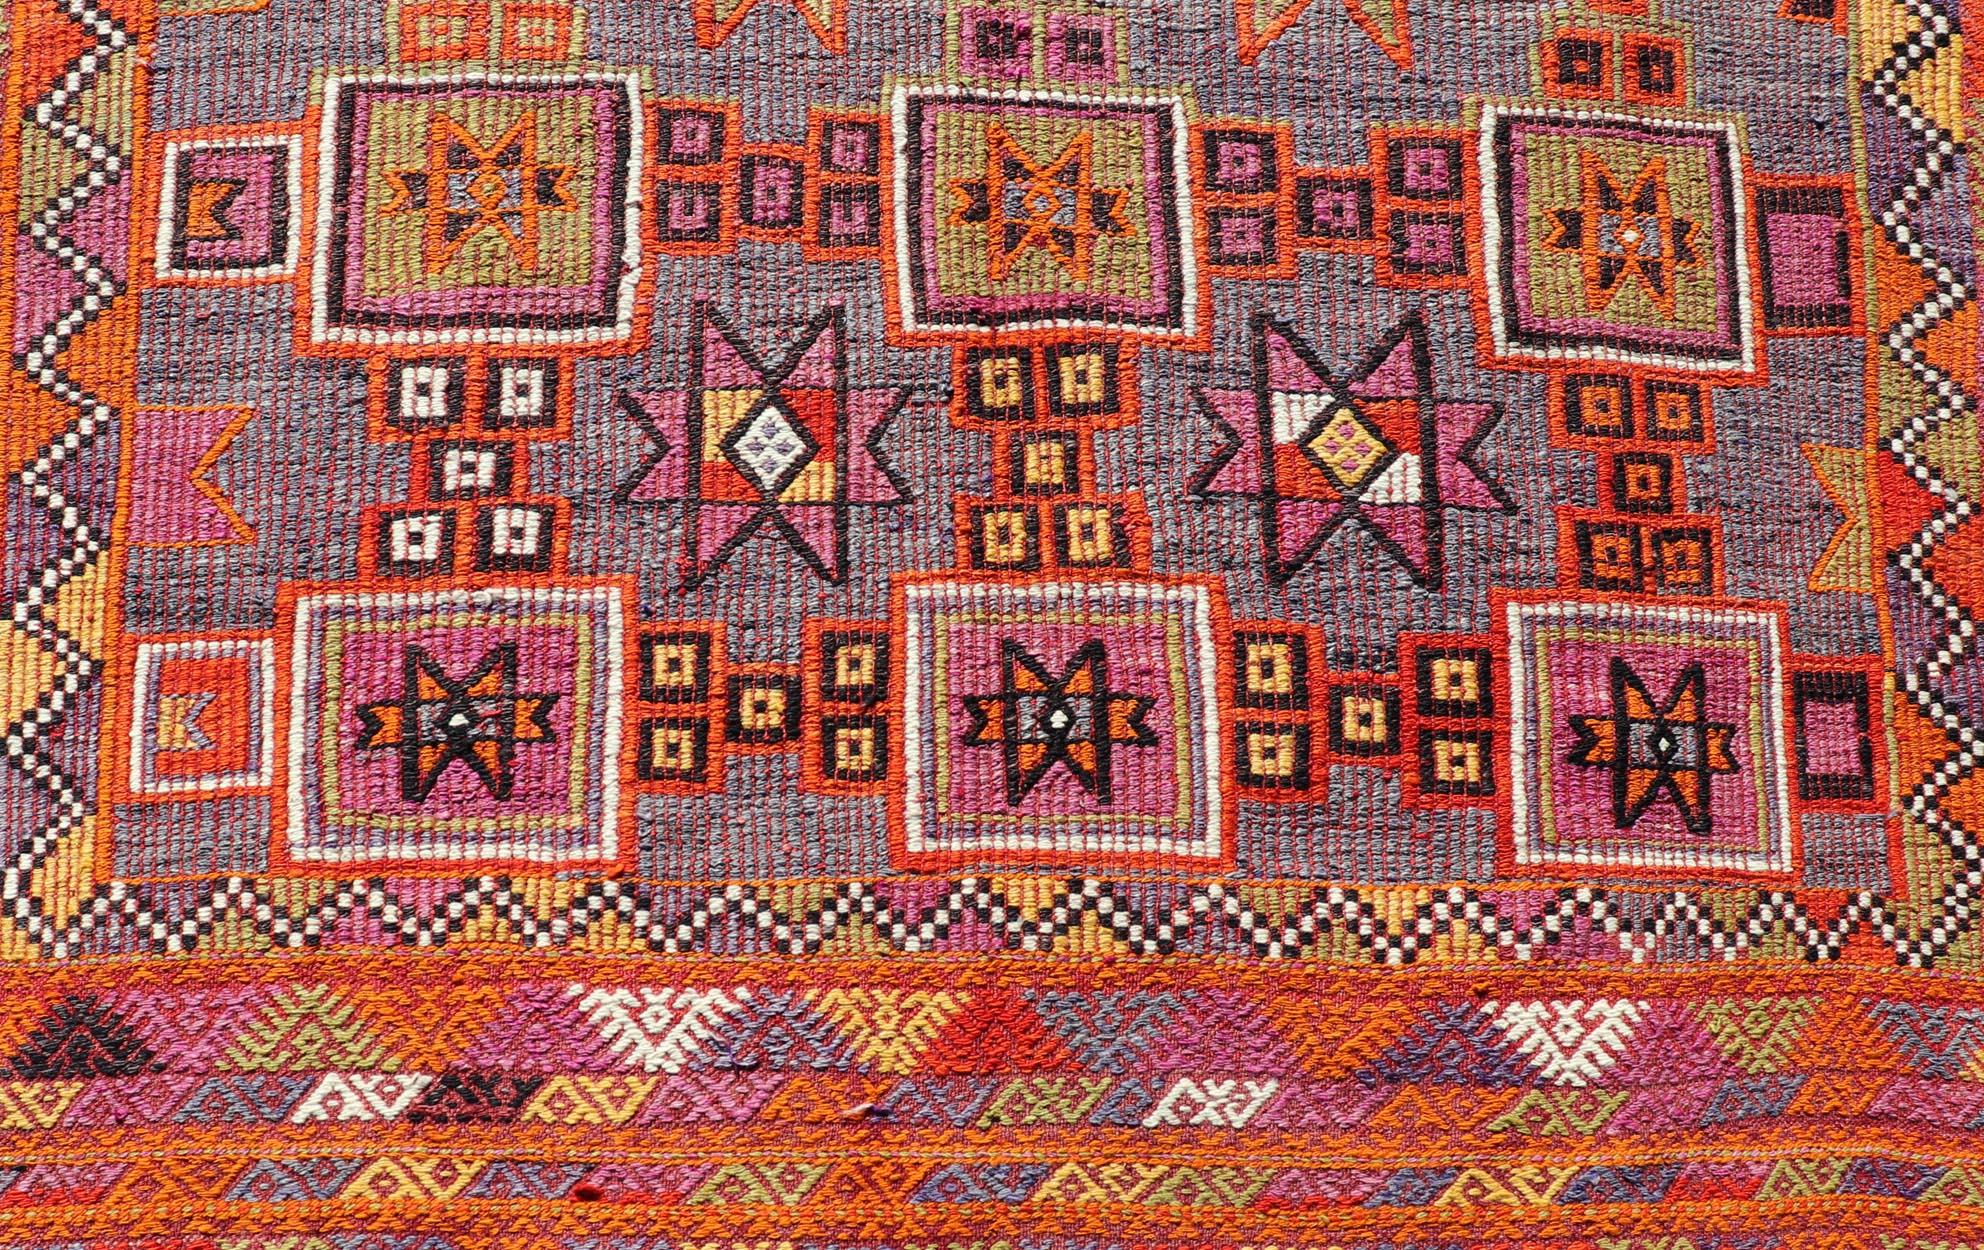 Measures: 5'7 x 9'10 
Colorful Vintage Kilim Embroidered Jajeem with Square and Star Design In Purple. Keivan Woven Arts / rug TU-NED-4697, country of origin / type: Turkey / Kilim, circa 1950
Featuring tribal shapes of stars and boxes with a